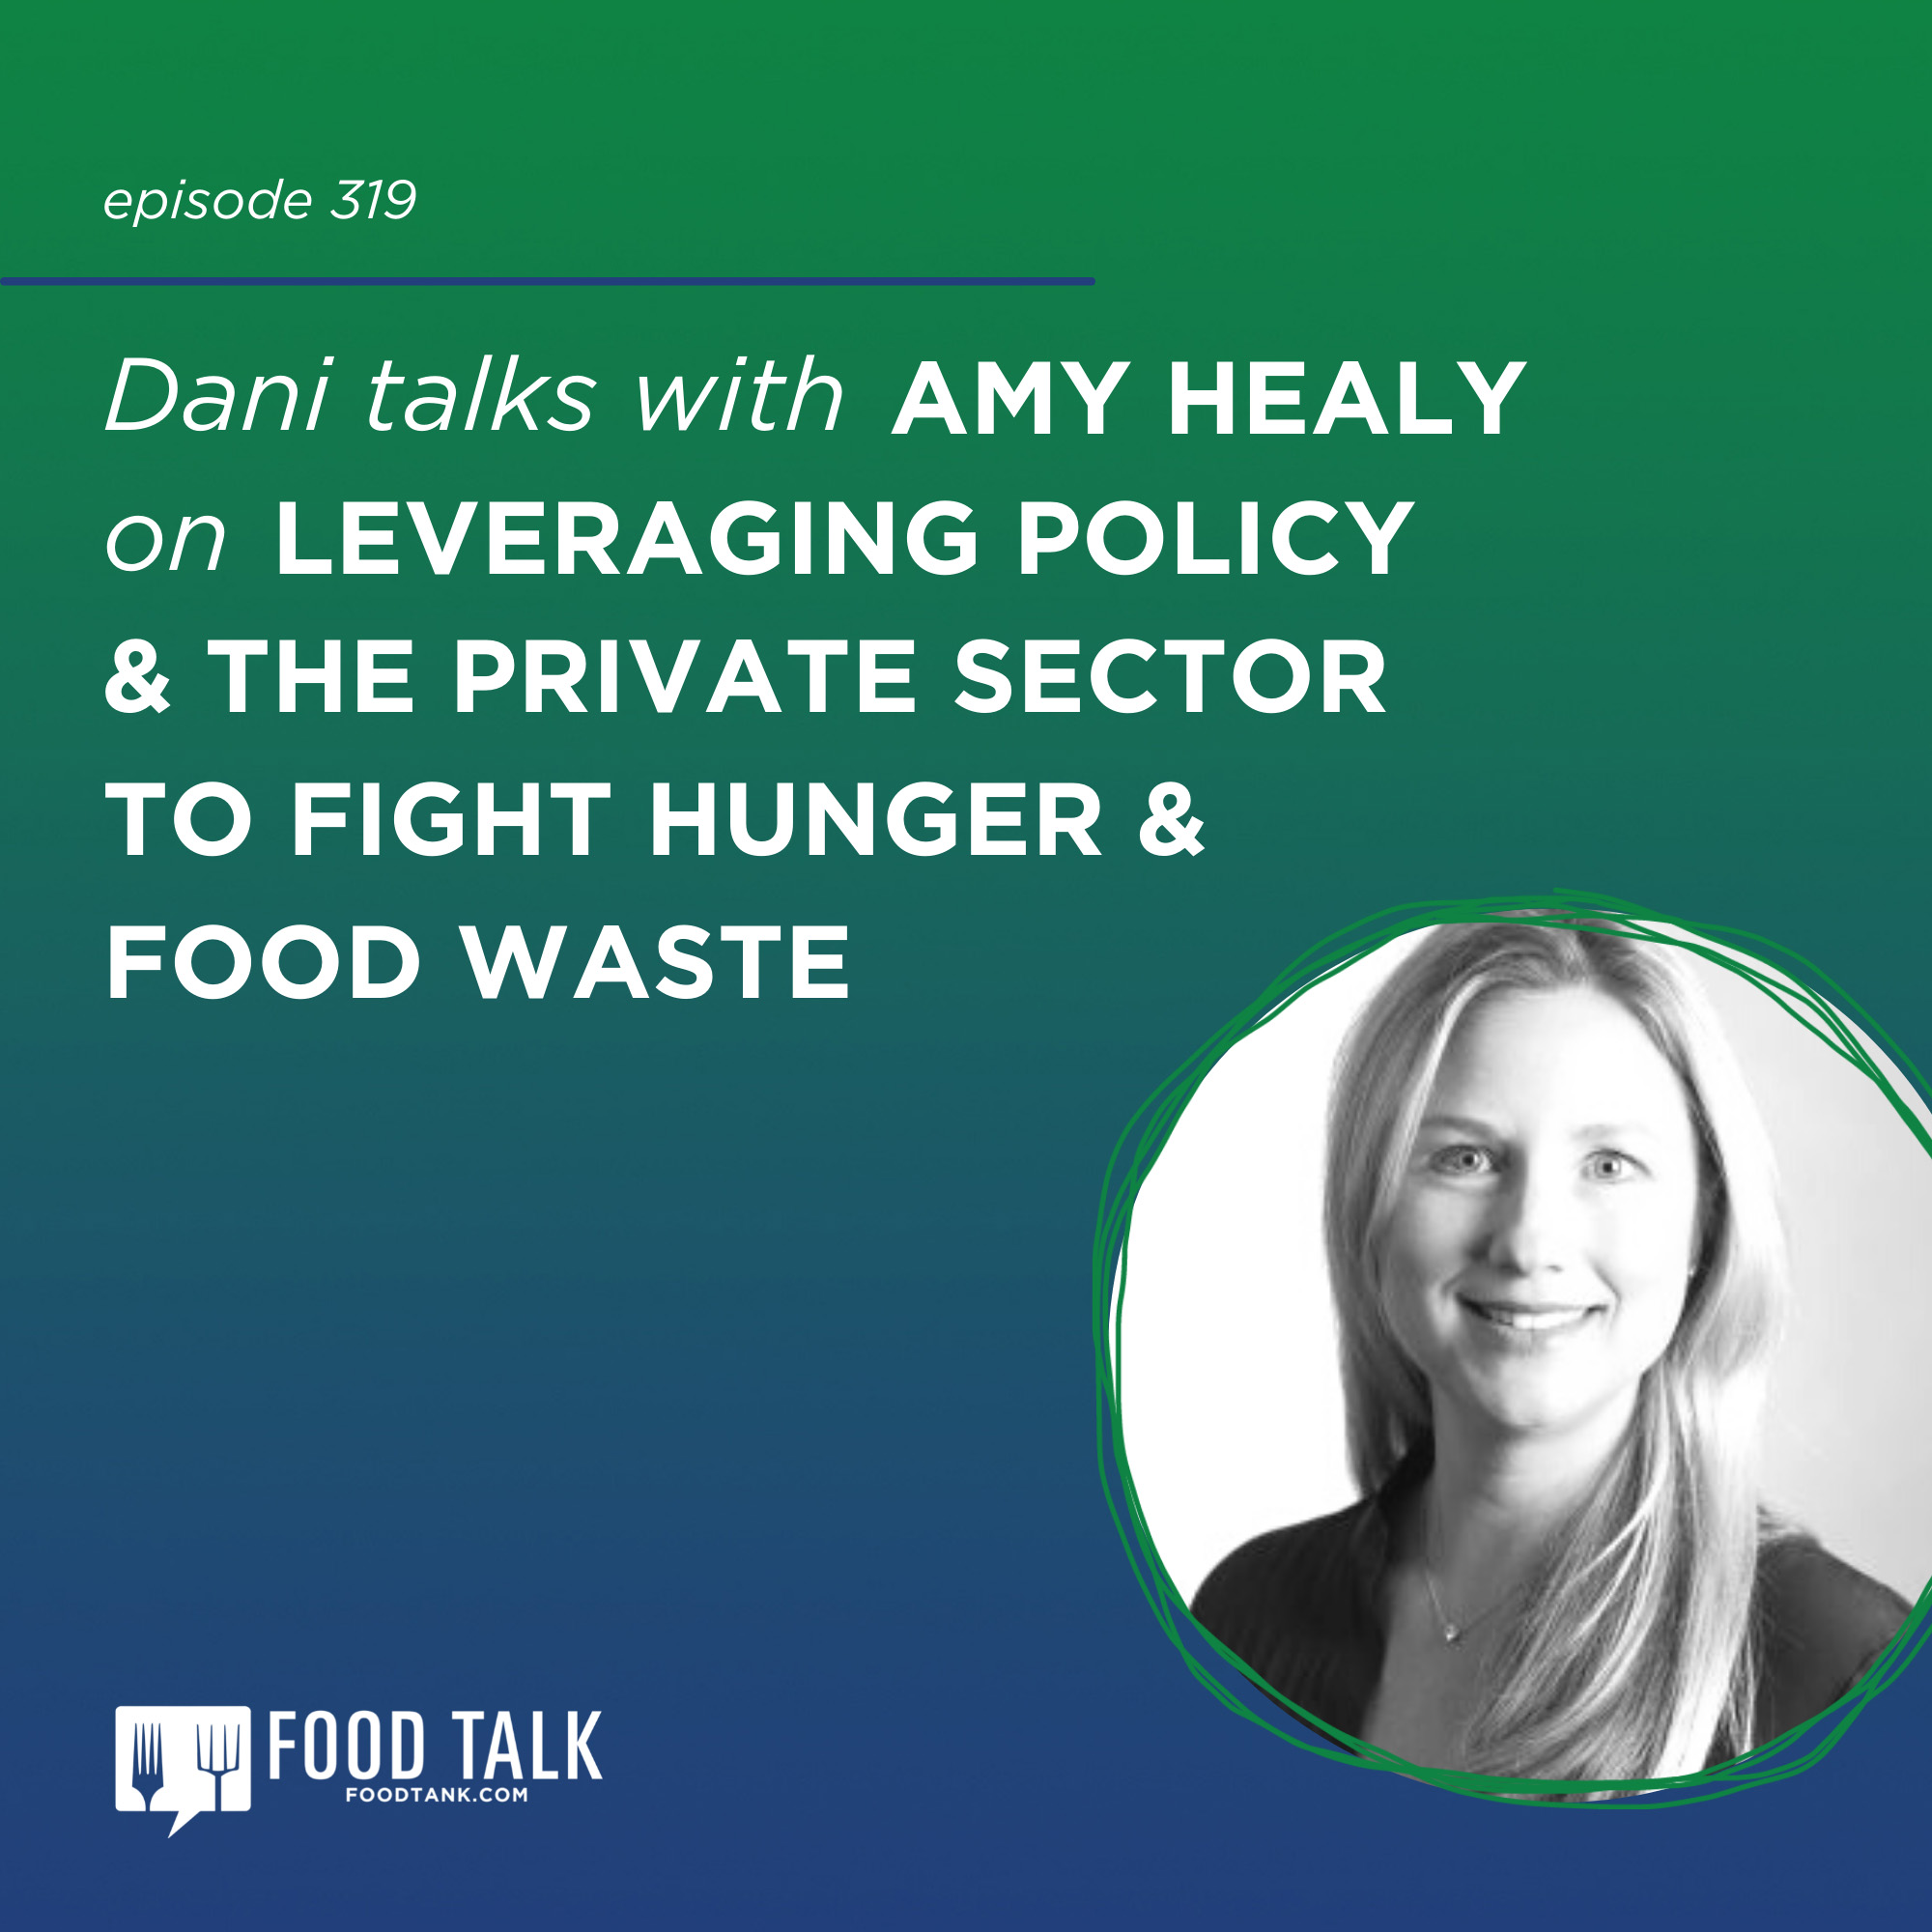 https://podcasts.apple.com/us/podcast/319-amy-healy-on-leveraging-policy-and-the-private/id1434128568?i=1000558711007